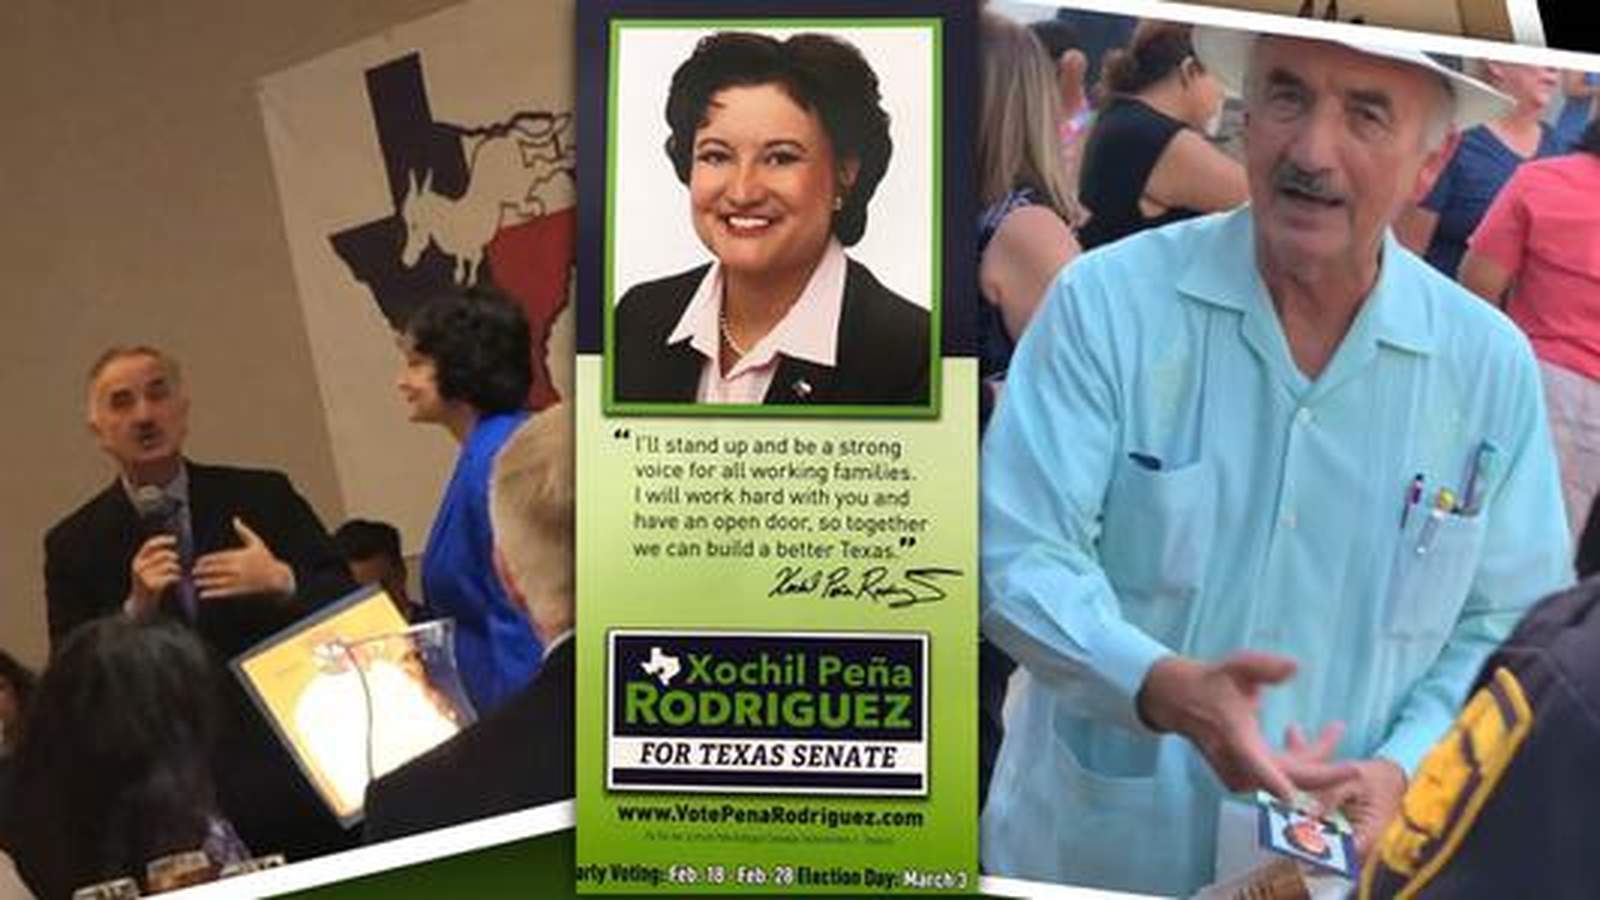 WATCH: Judge campaigns for daughter in state senate race; appears to violate state judicial code of conduct